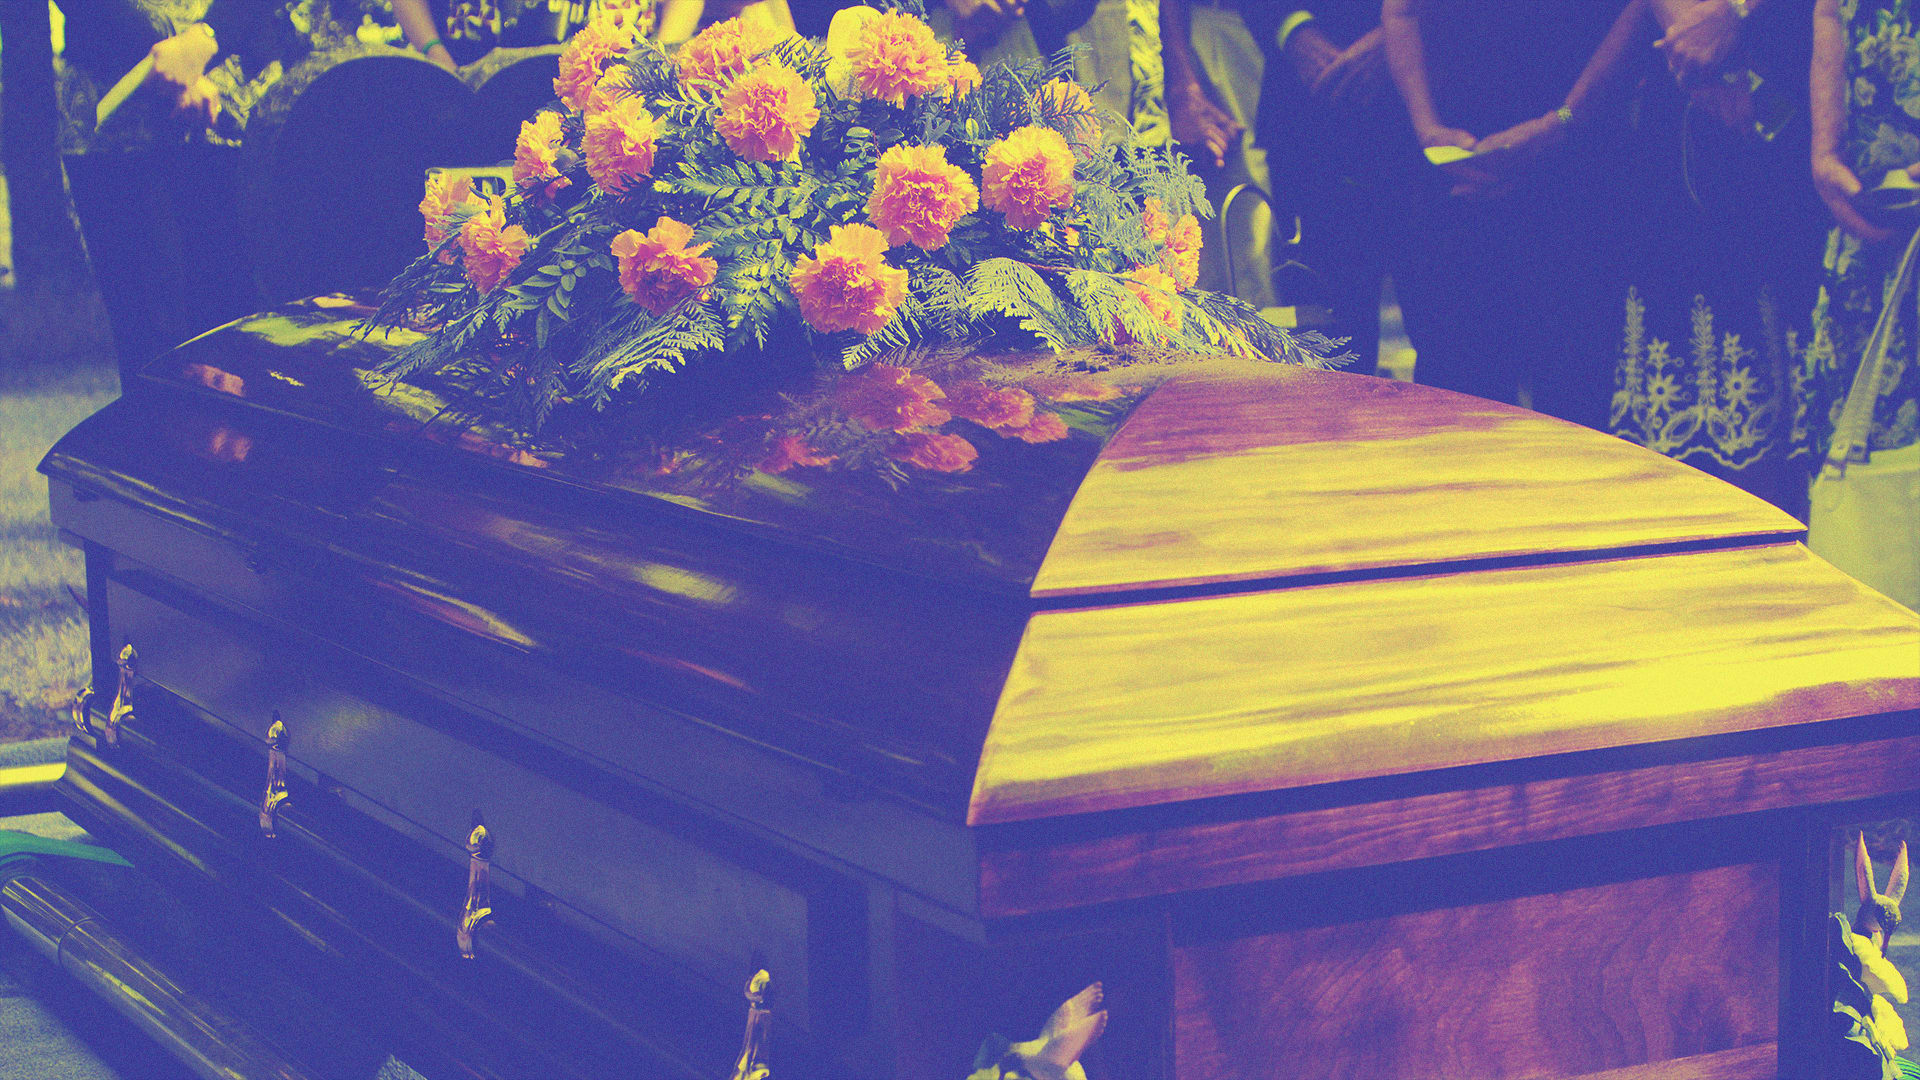 How vividly imagining your own death can help your next career move